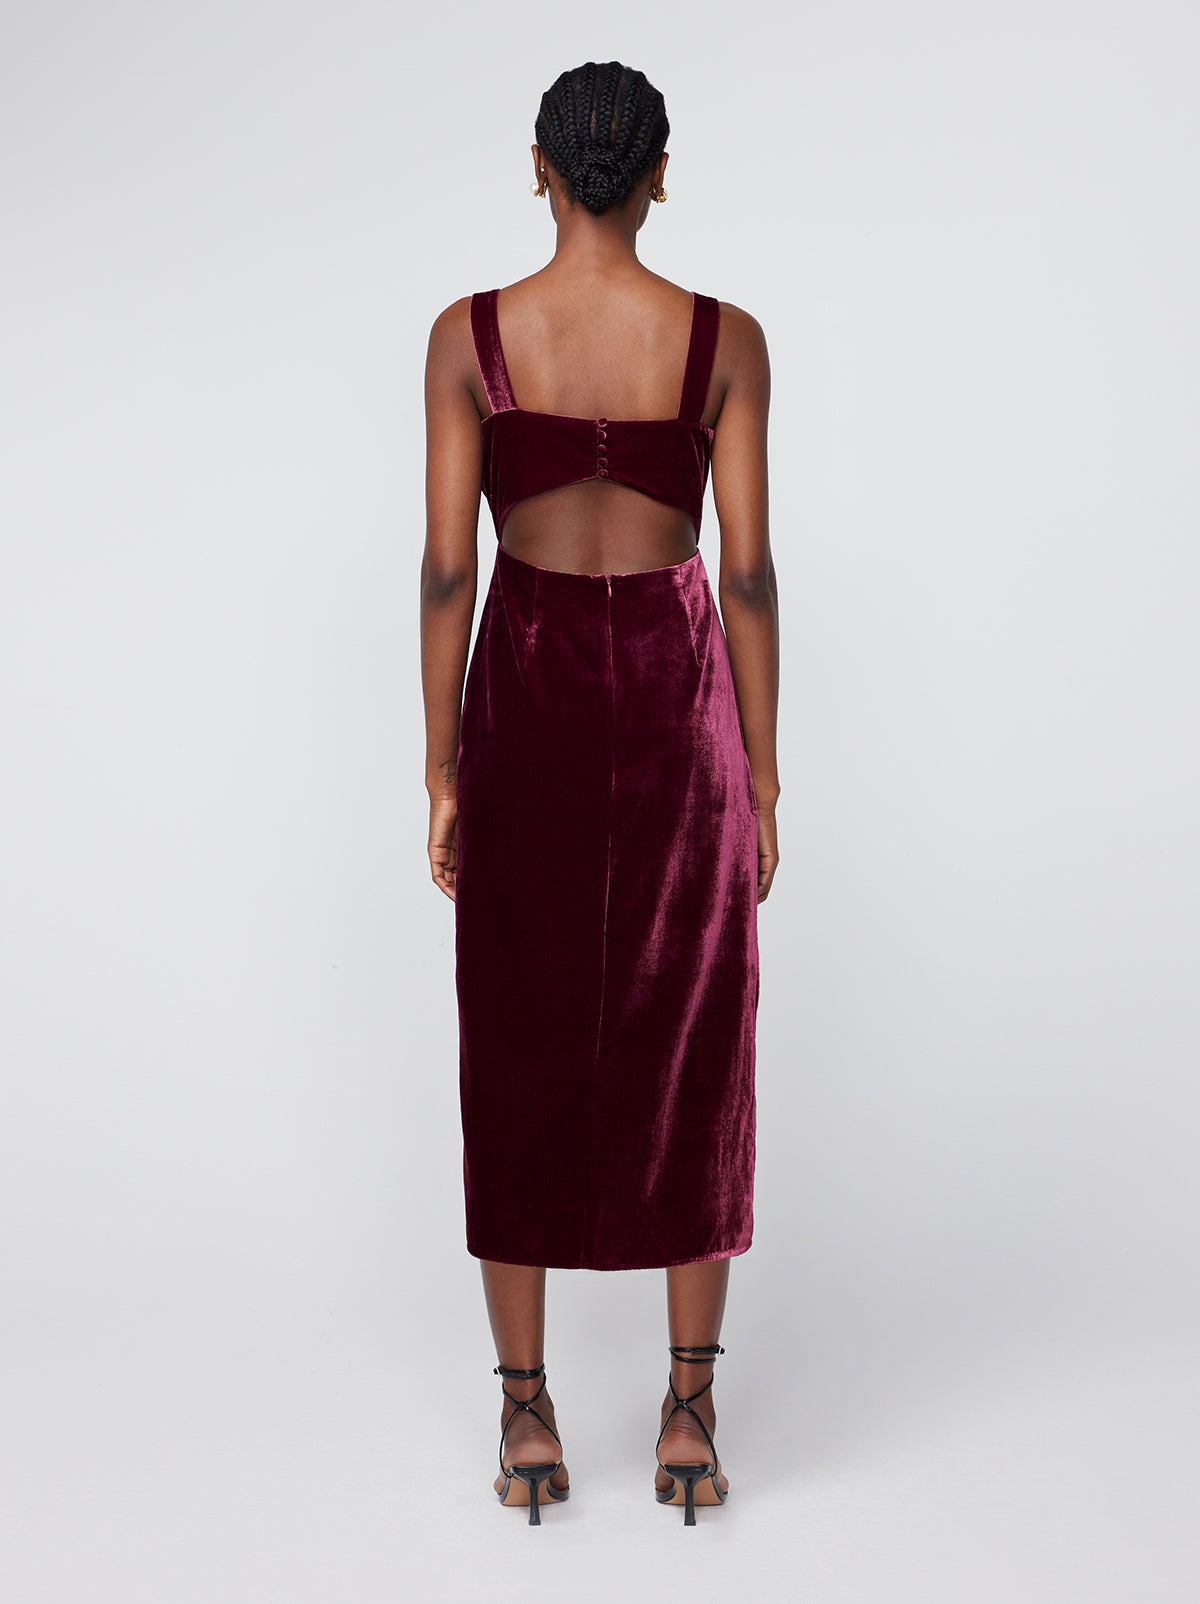 Aretha Burgundy Velvet Dress By KITRI Studio in a deep burgandy/maroon velvet fabric. A sultry midi length party dress ideal for Christmas/festive parties and other occasions. Featuring wide straps, open back detail and thigh split, this glamourous dress is as elegant as it is flattering. Best paired with stilletoes